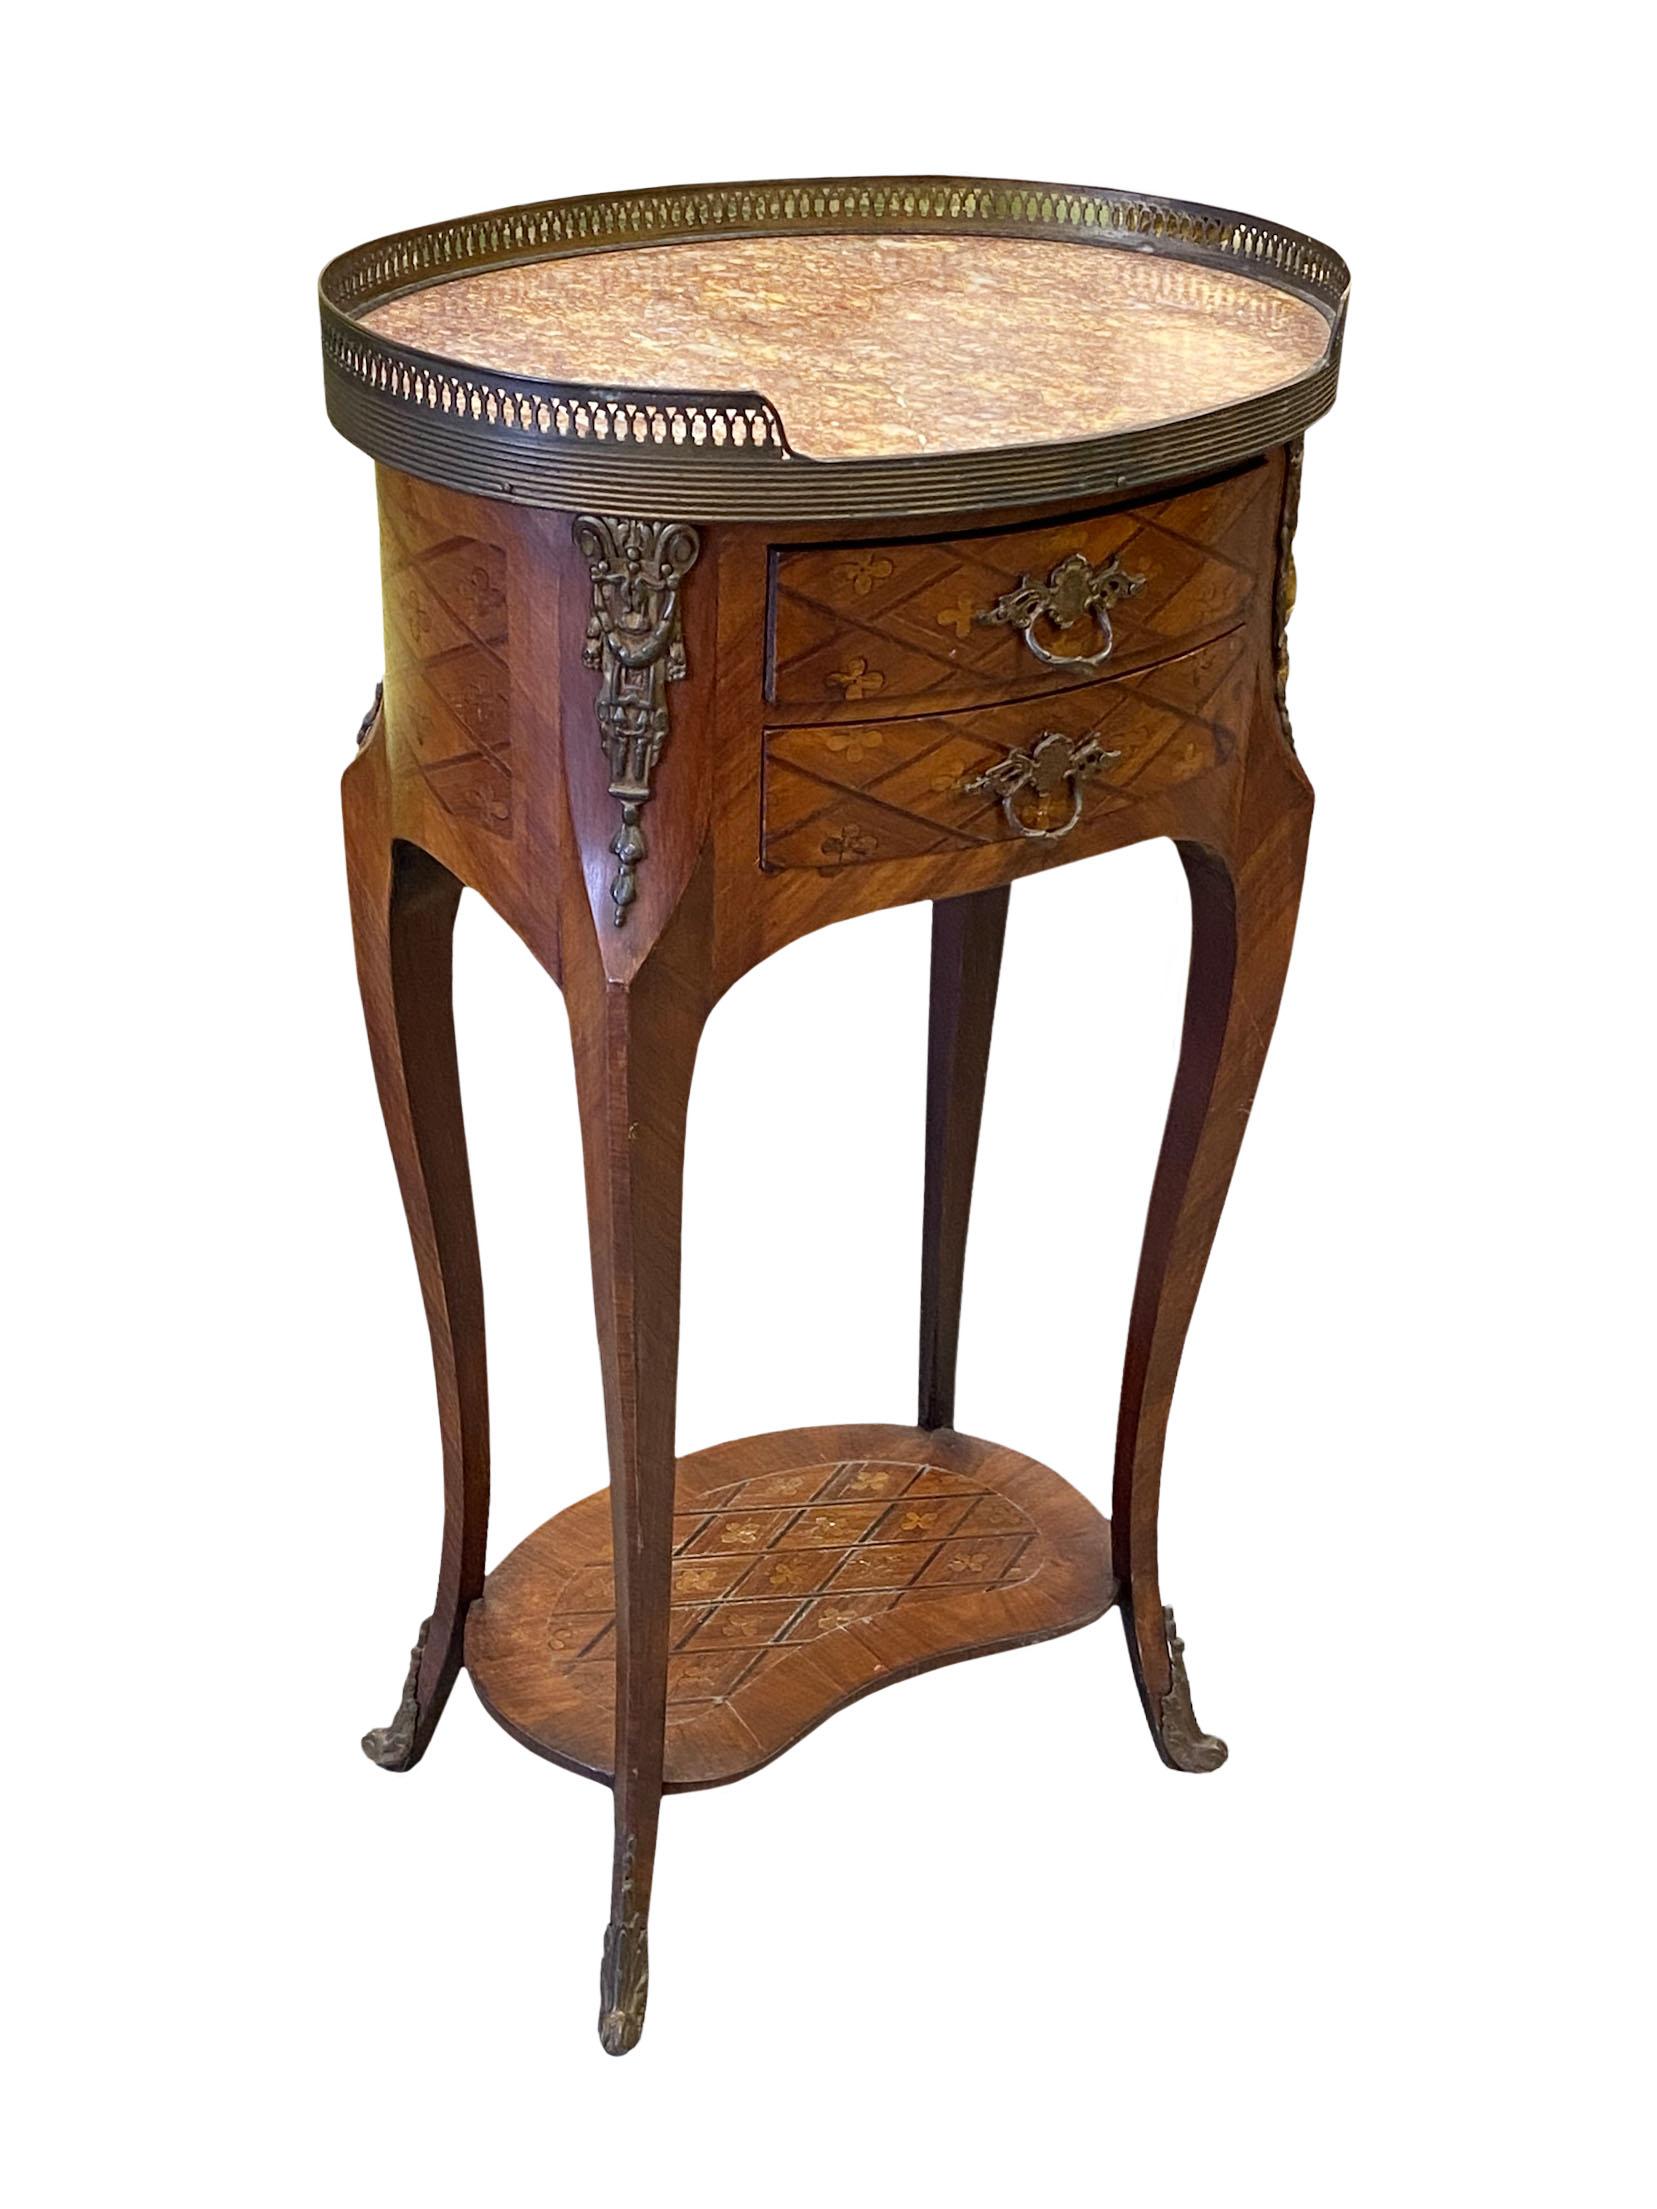 Louis XVI side table with marquetry inlay with flue-de-lis. Lower shelf and a bronze gallery with a marble top. Bronze mounts all the way around, bronze handles and sabots. Can float in room finished all the way around. Circa 1800s.